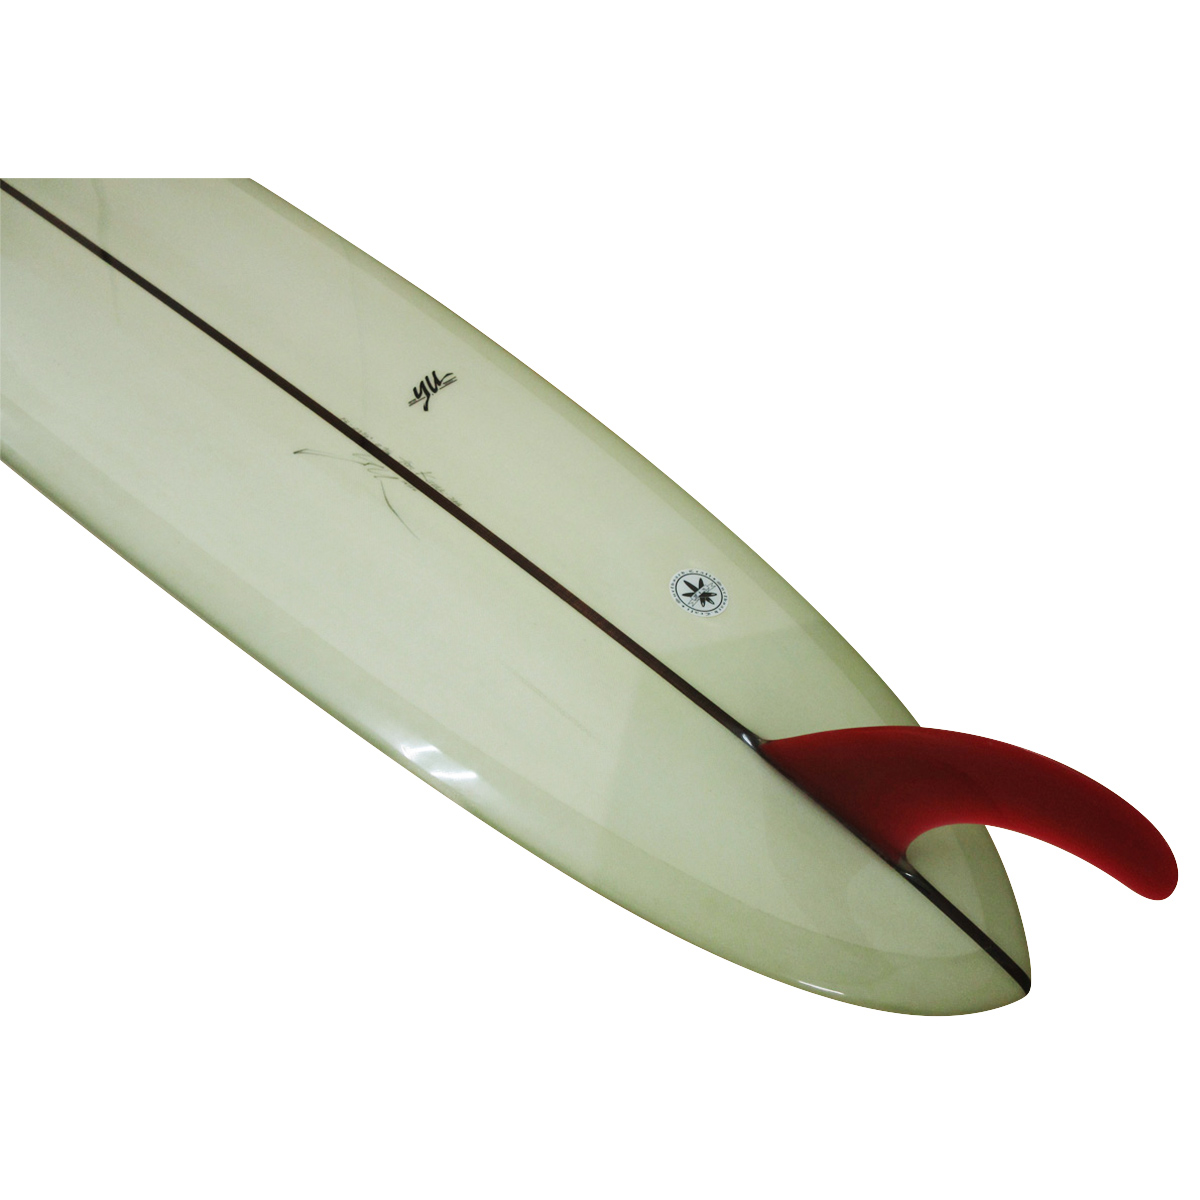 YU SURF CLASSIC / ROUND PIN NOSERIDER 9`6 Shaped By YU